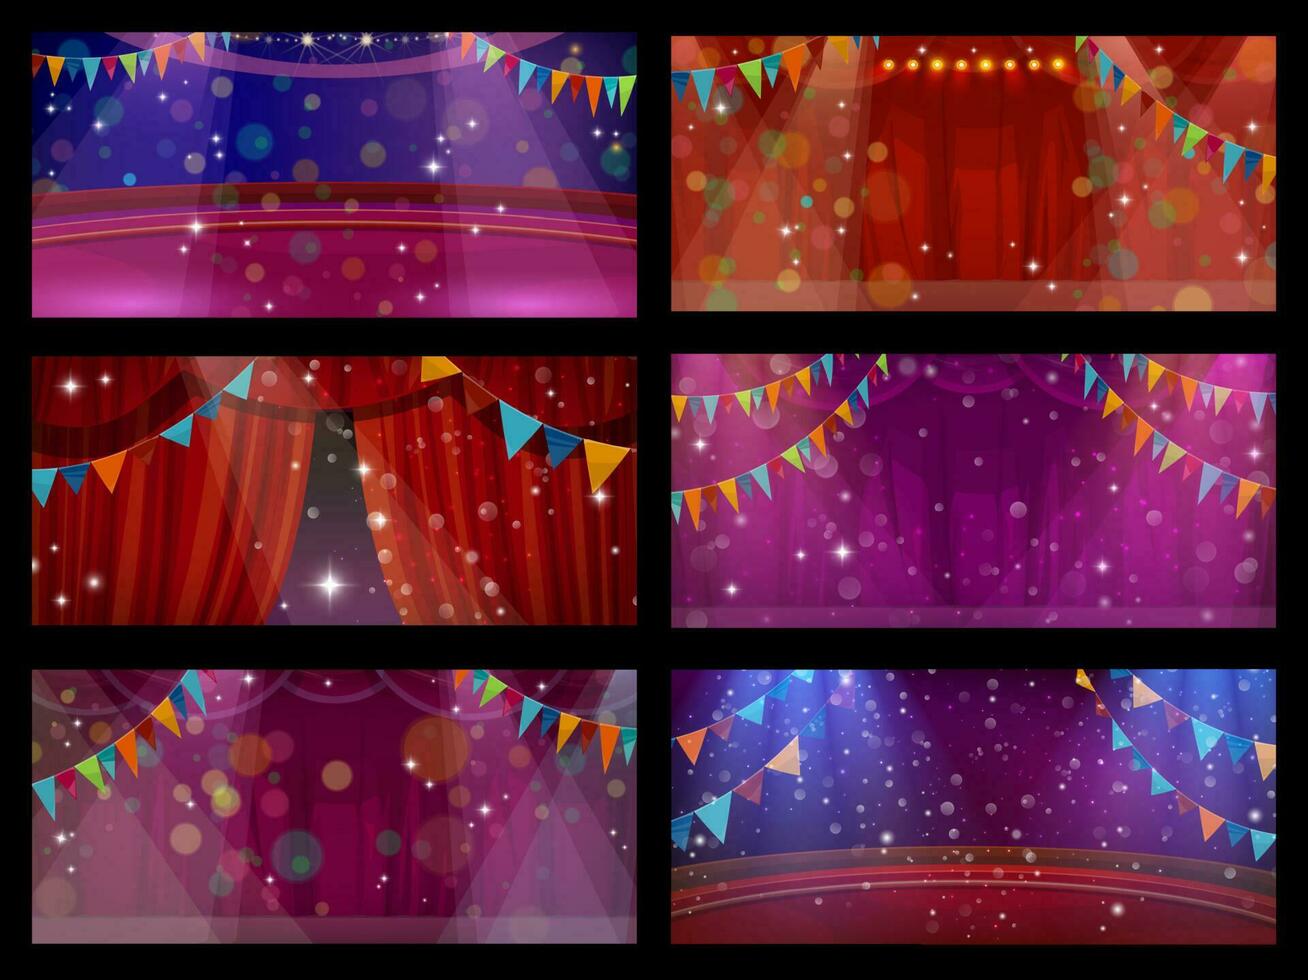 Circus and theater stage interior with curtains vector